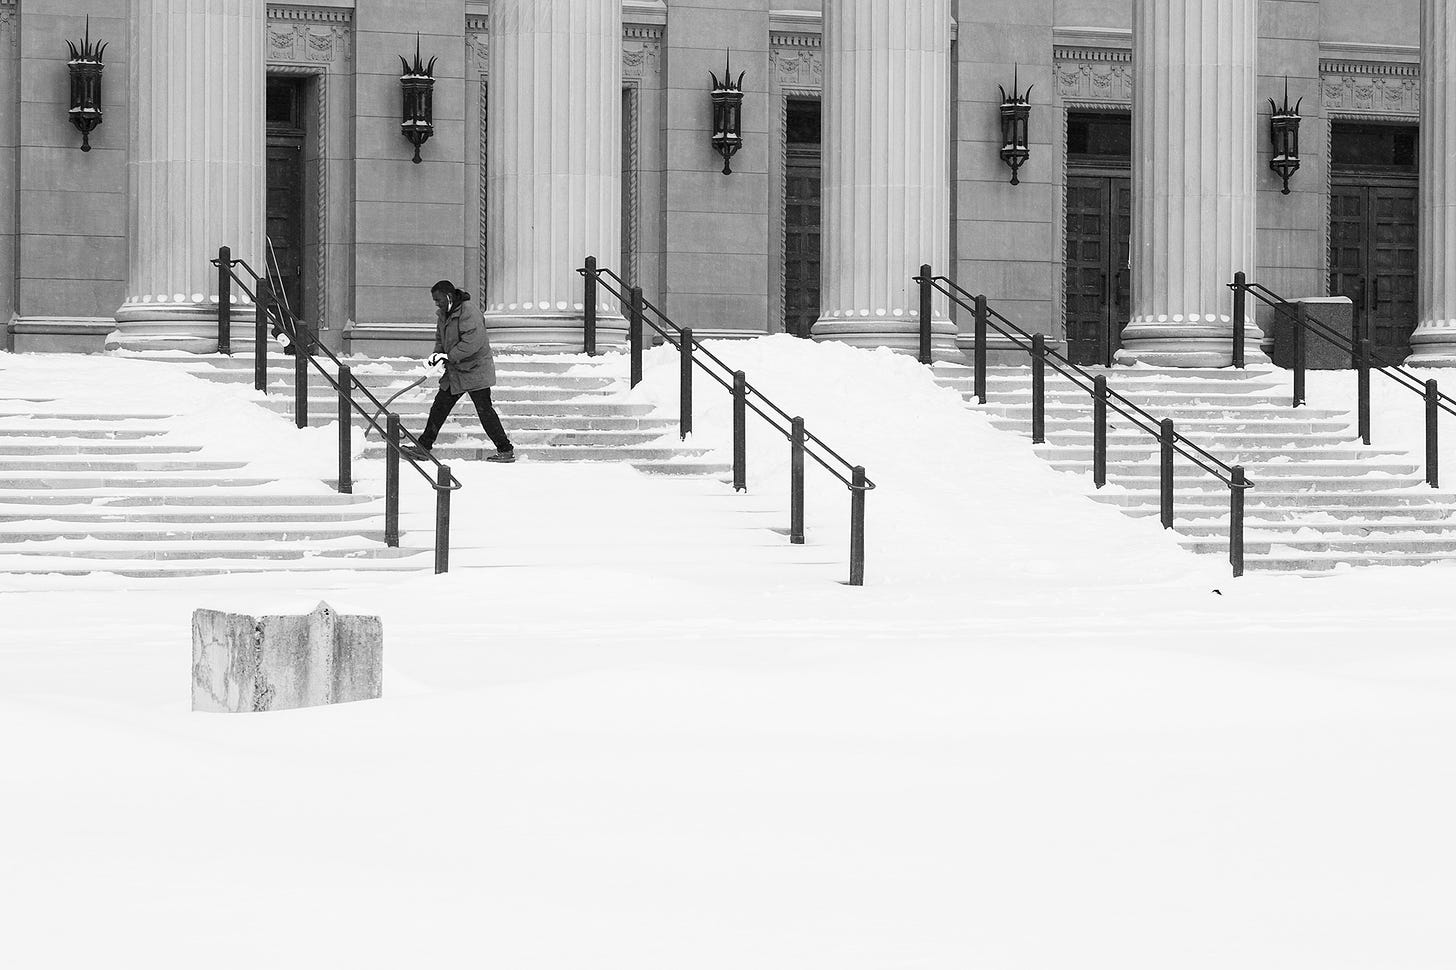 A man shovels snow from the main steps of the Northrop auditorium.